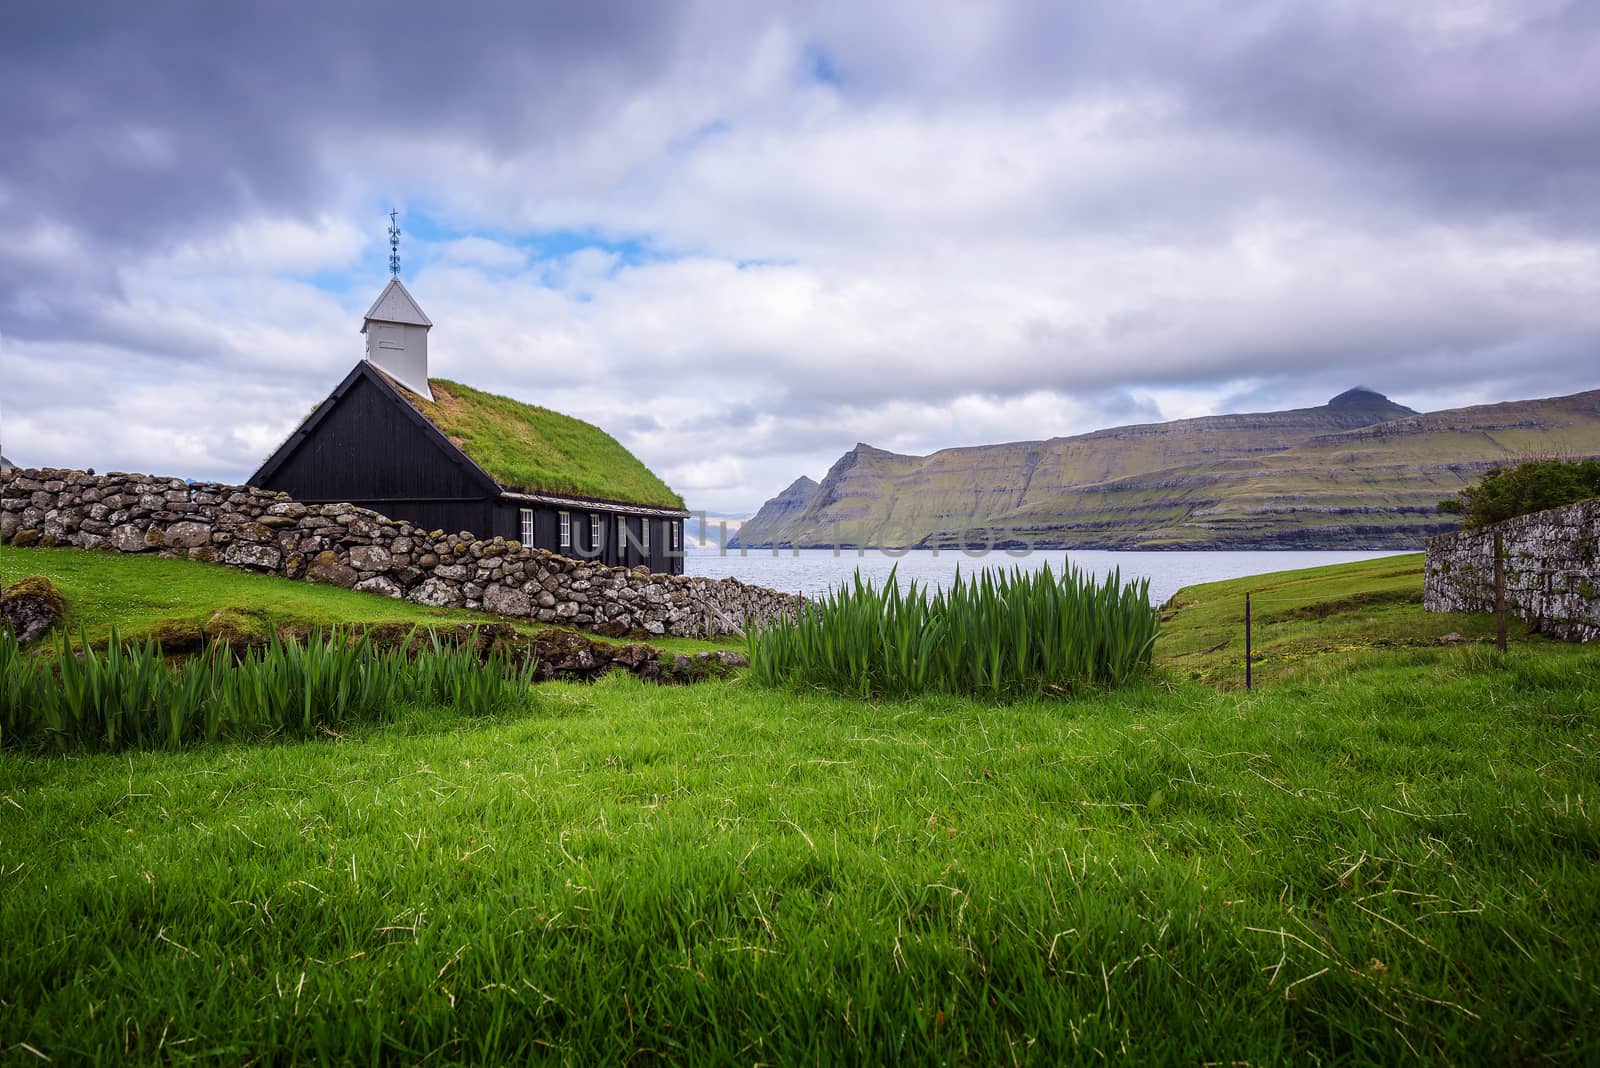 Small black wooden church in the village of Funningur situated on the sea shore. Funningur is located on the island of Eysturoy, Faroe Islands, Denmark